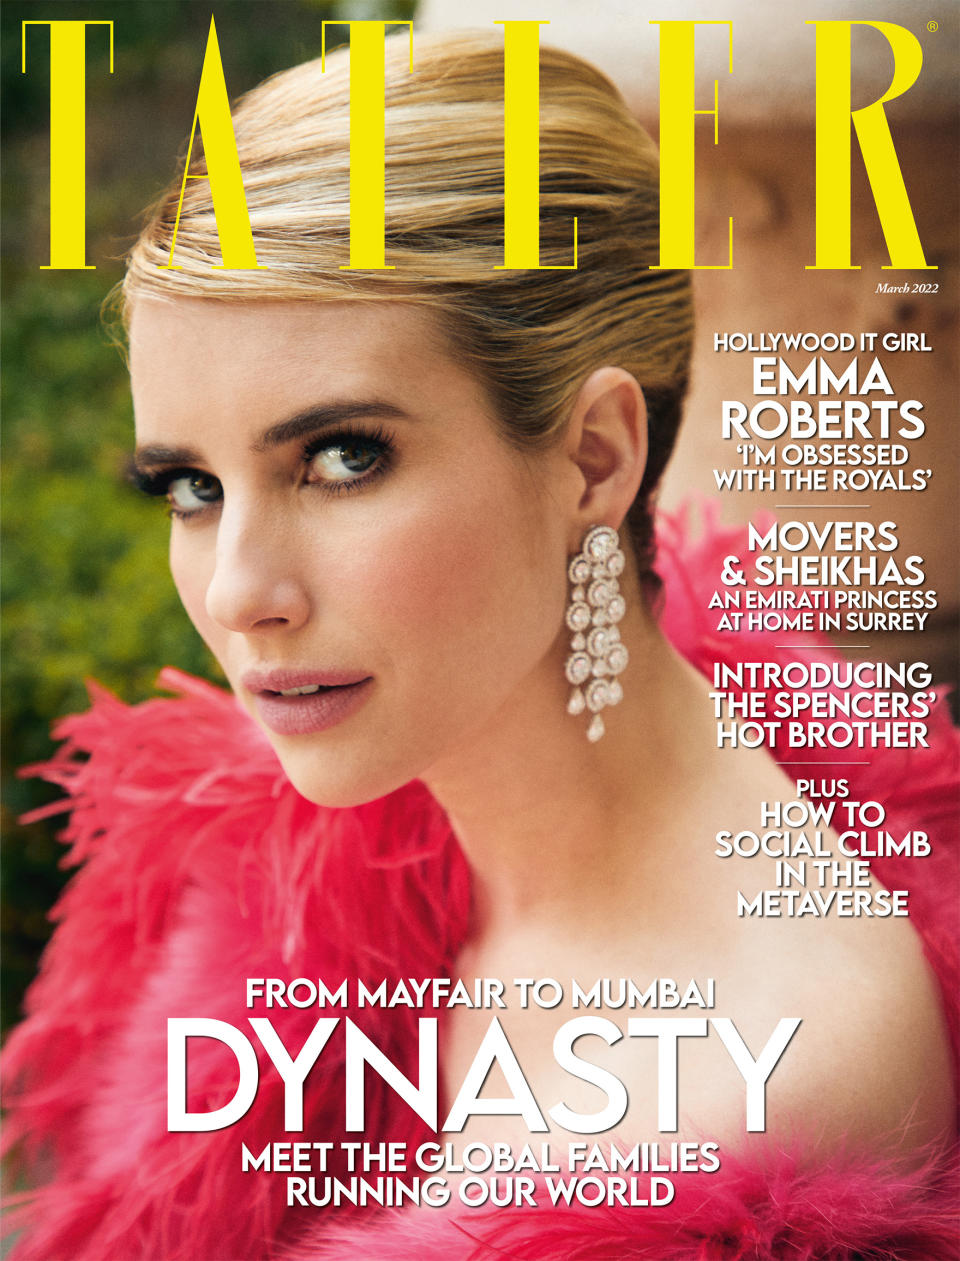 Emma Roberts stars on the March cover of Tatler (Photography by Victor Demarchelier)